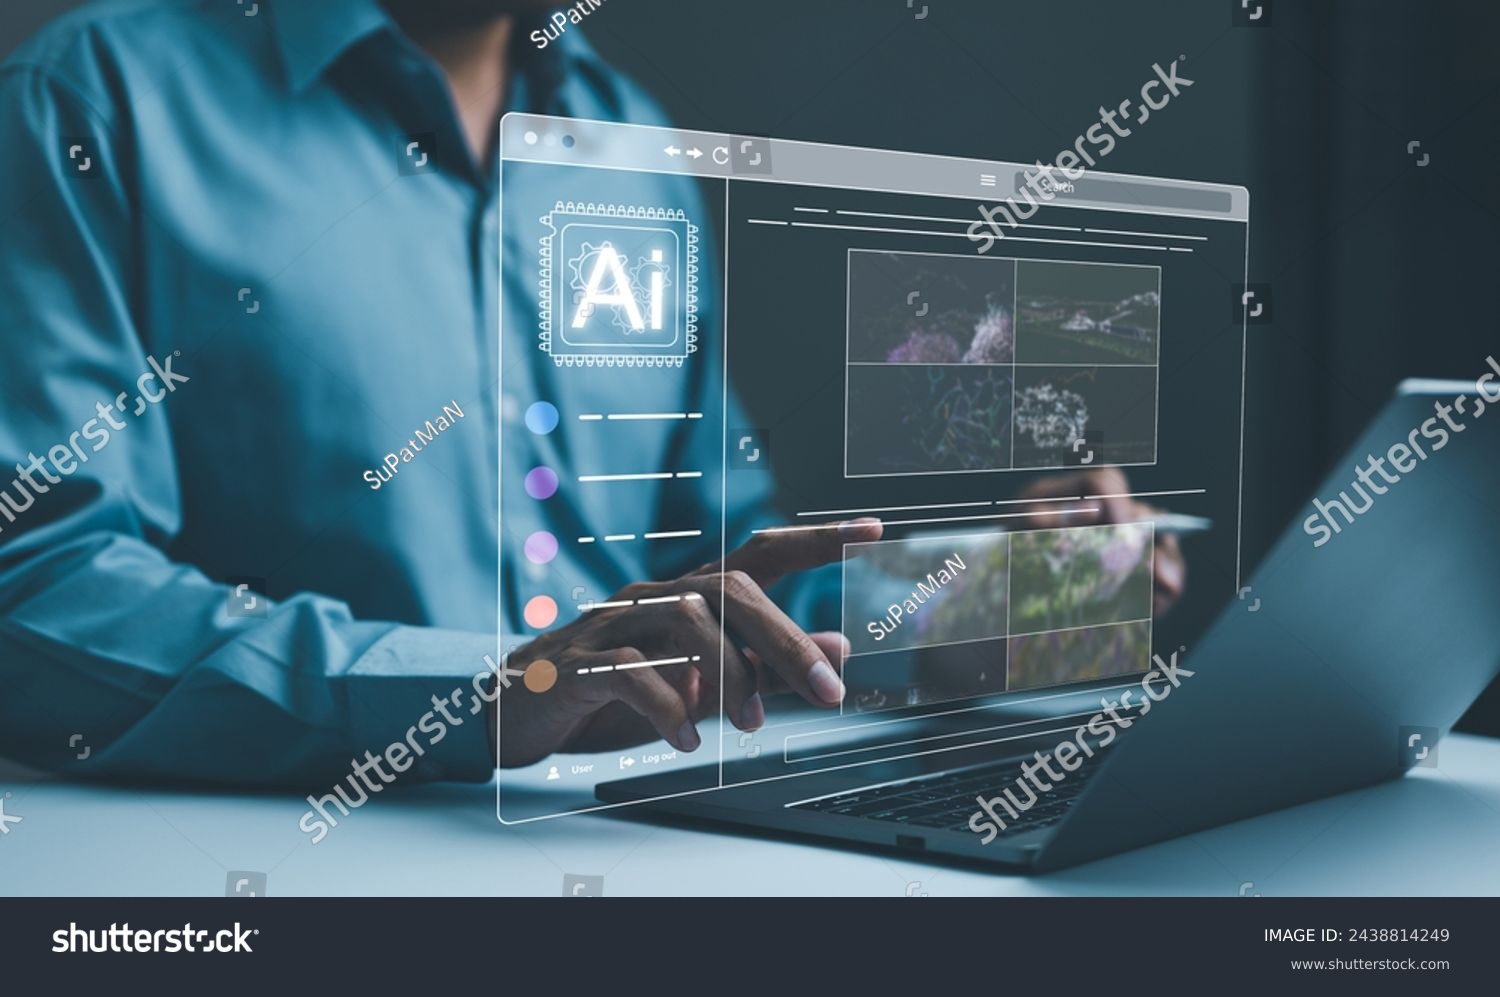 AI image creation technology. Man use AI software on a laptop to generate images, showcasing a futuristic user interface. screen with visual prompt. Image generated by artificial intelligence. photo, #2438814249